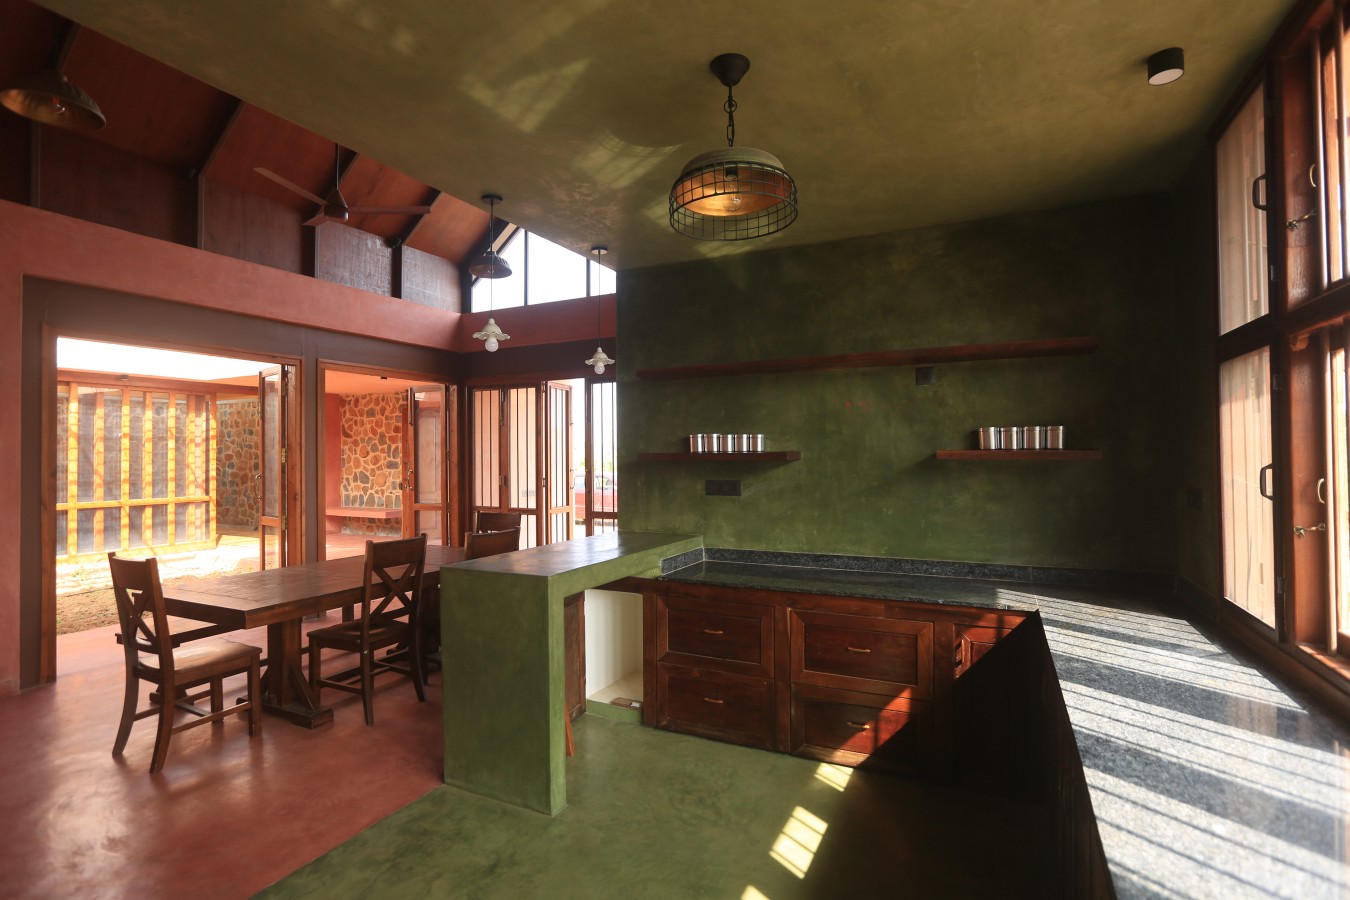 Kitchen and dining room with oxide flooring and lime plaster walls